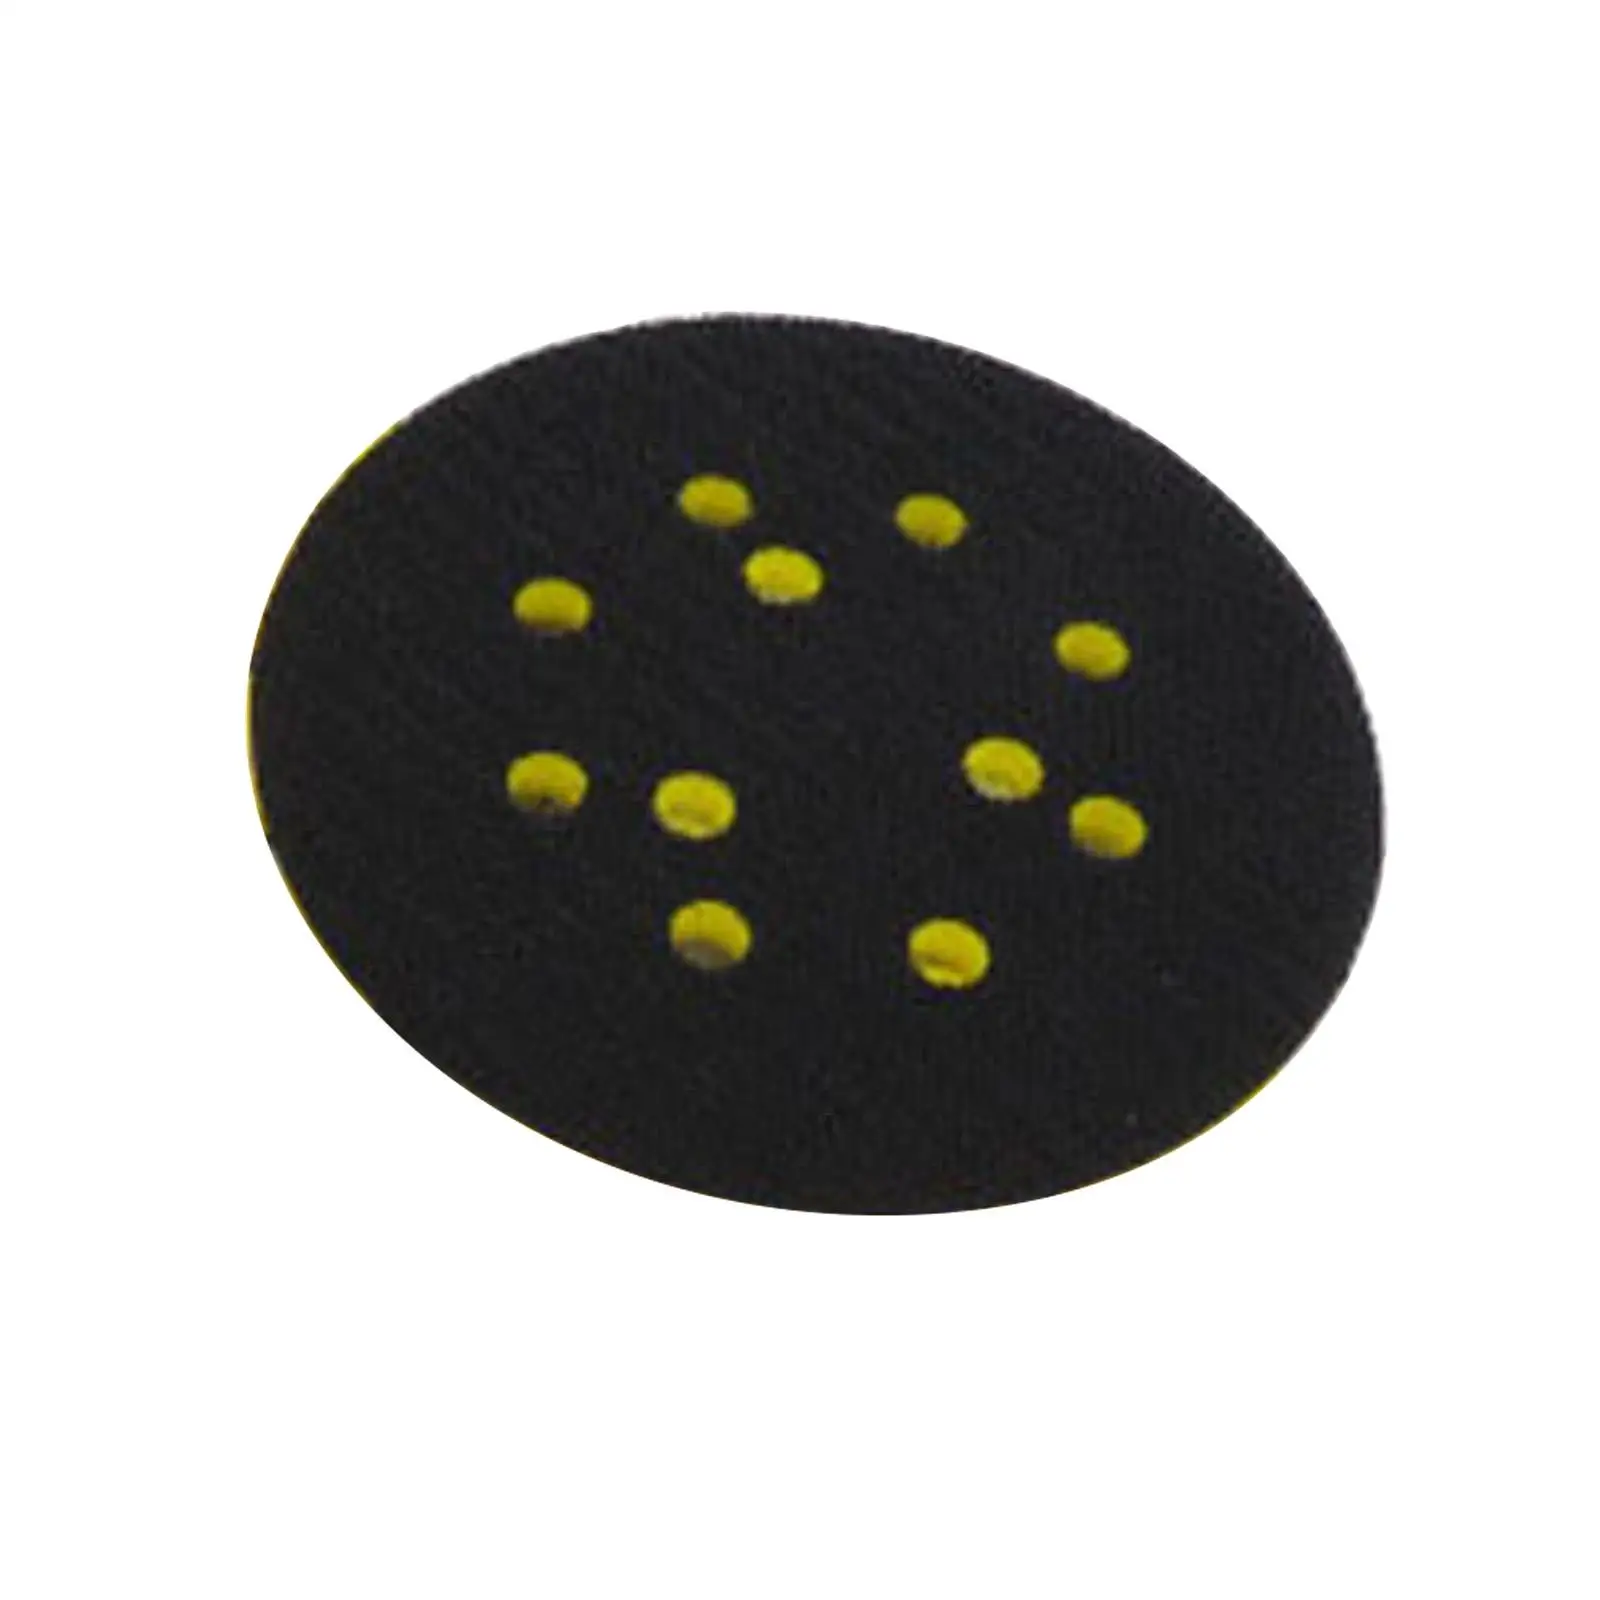 Stable Polishing Backing Pad Replacement Fitments Backer Pads